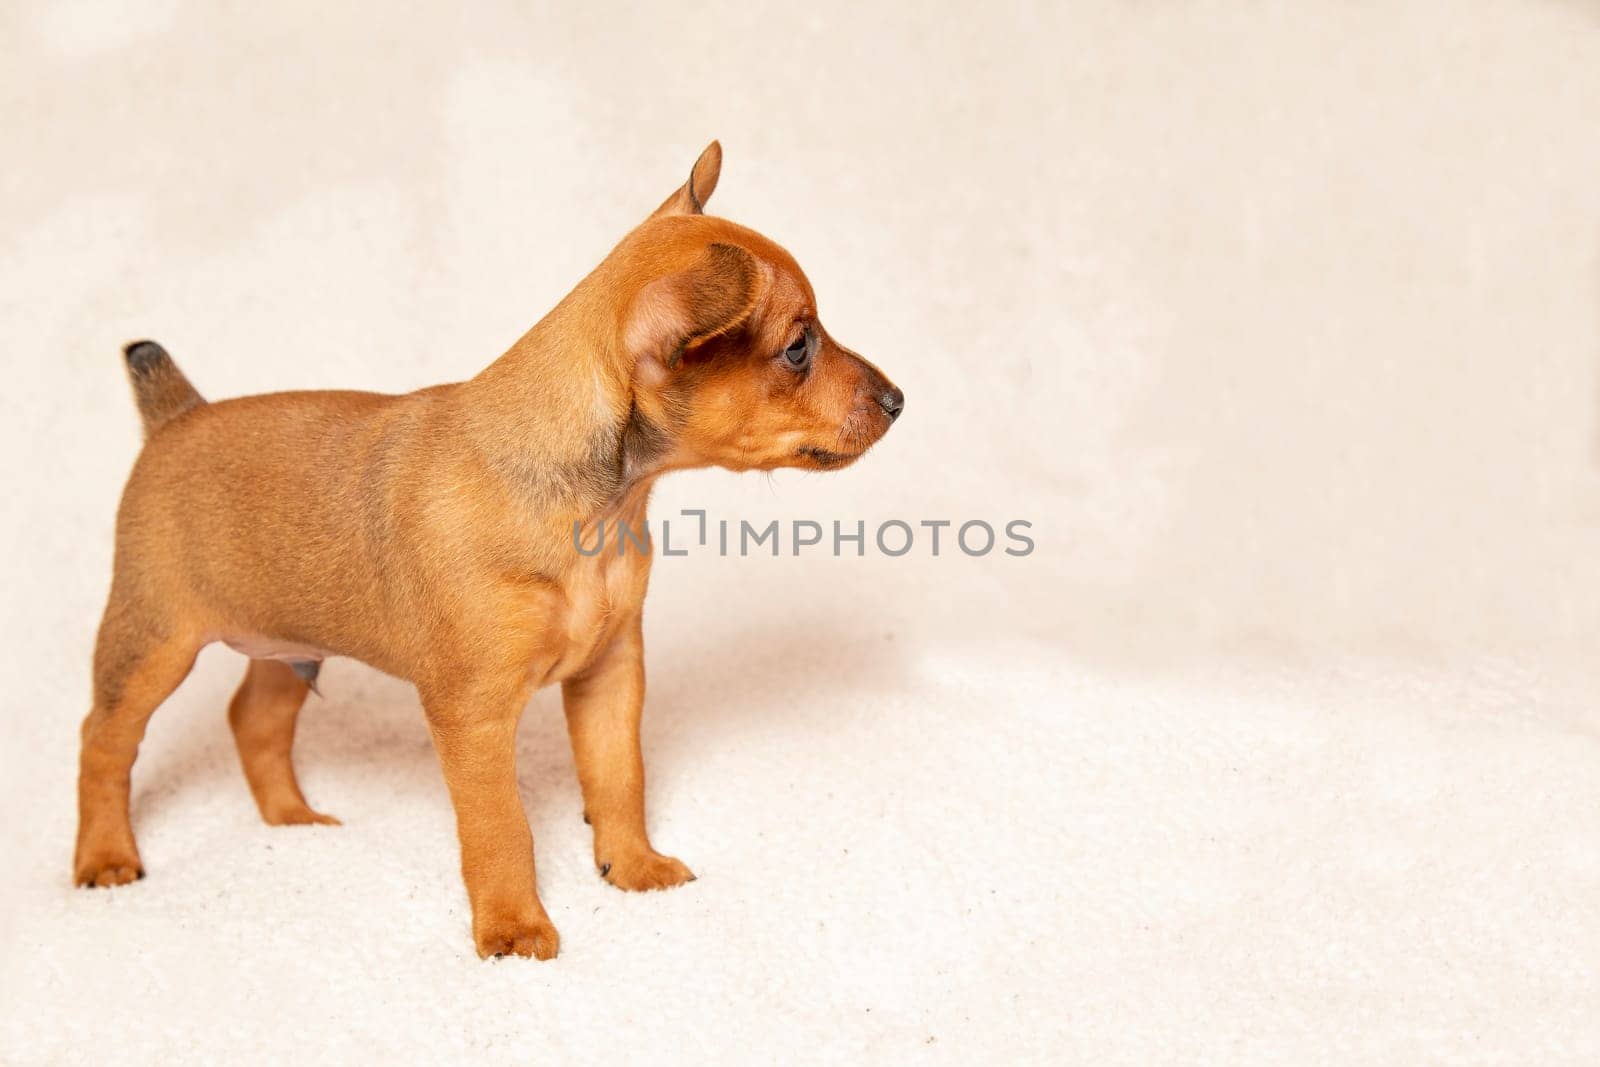 The little dog stands and looks away. Cute puppy on a light background, pinscher. A pet. Copy space.